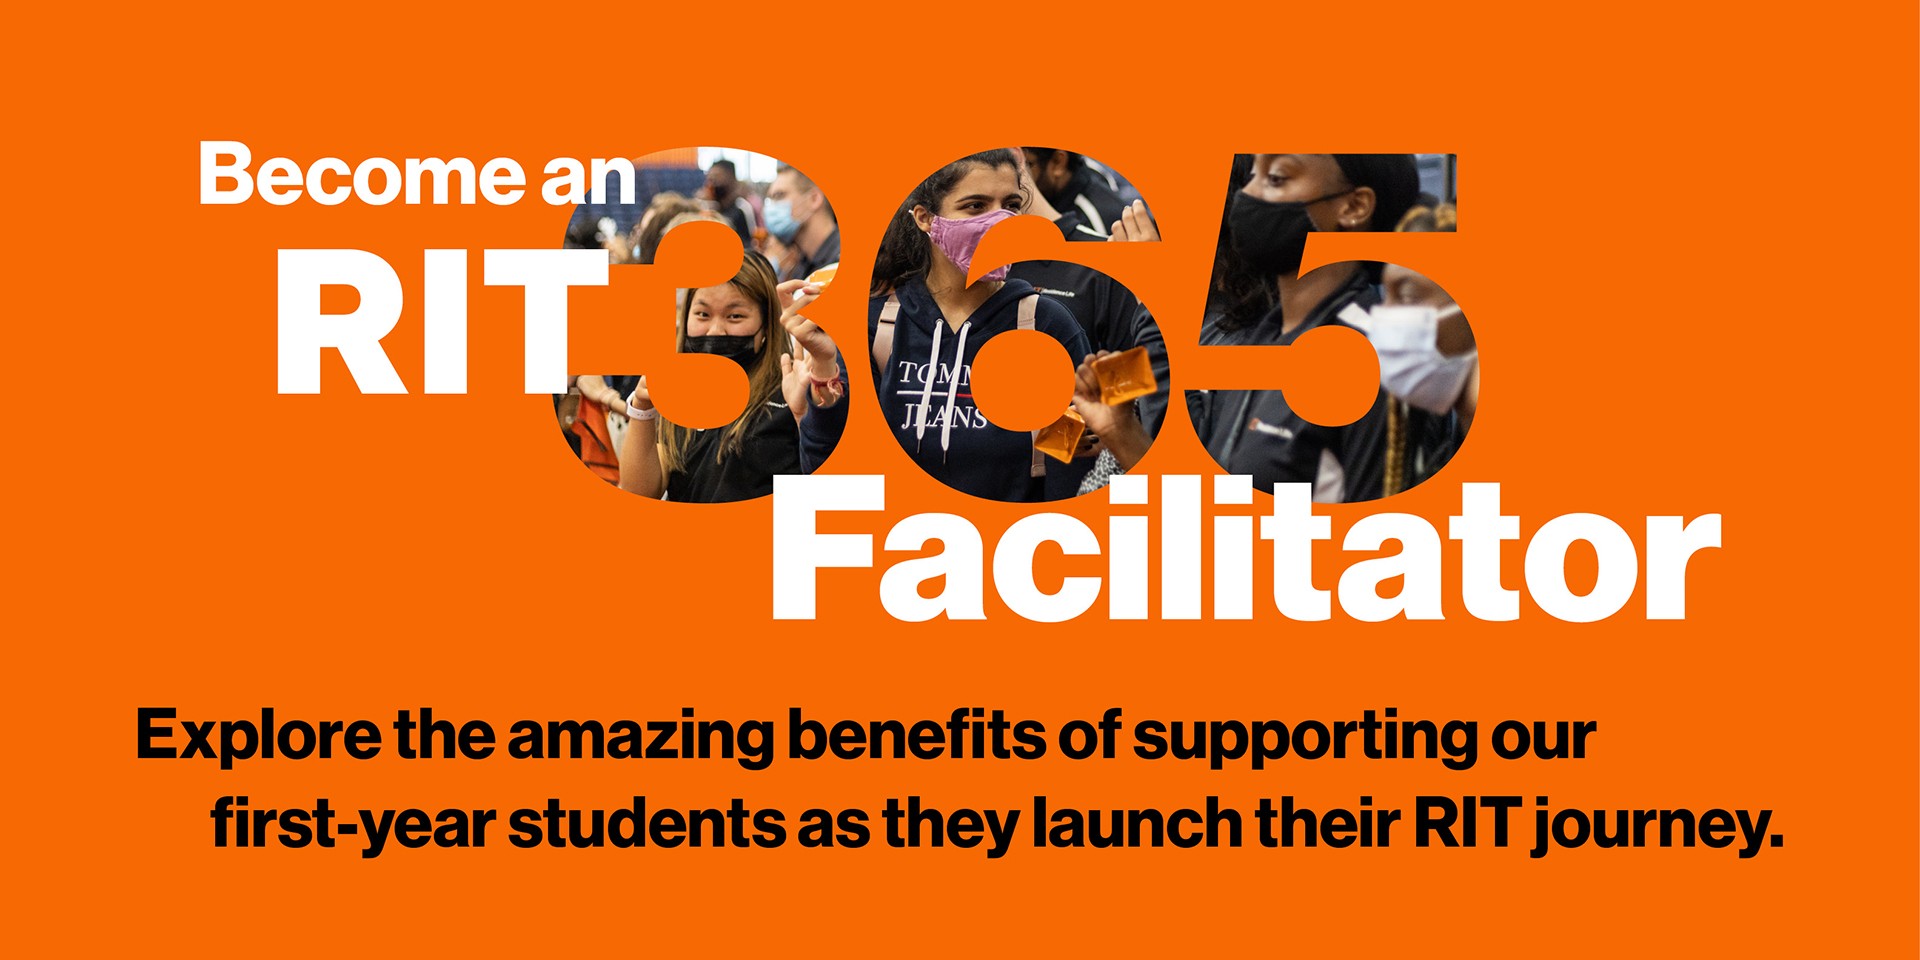 Become an RIT 365 Facilitator. Explore the amazing benefits of supporting our first-year students as they launch their RIT journey.